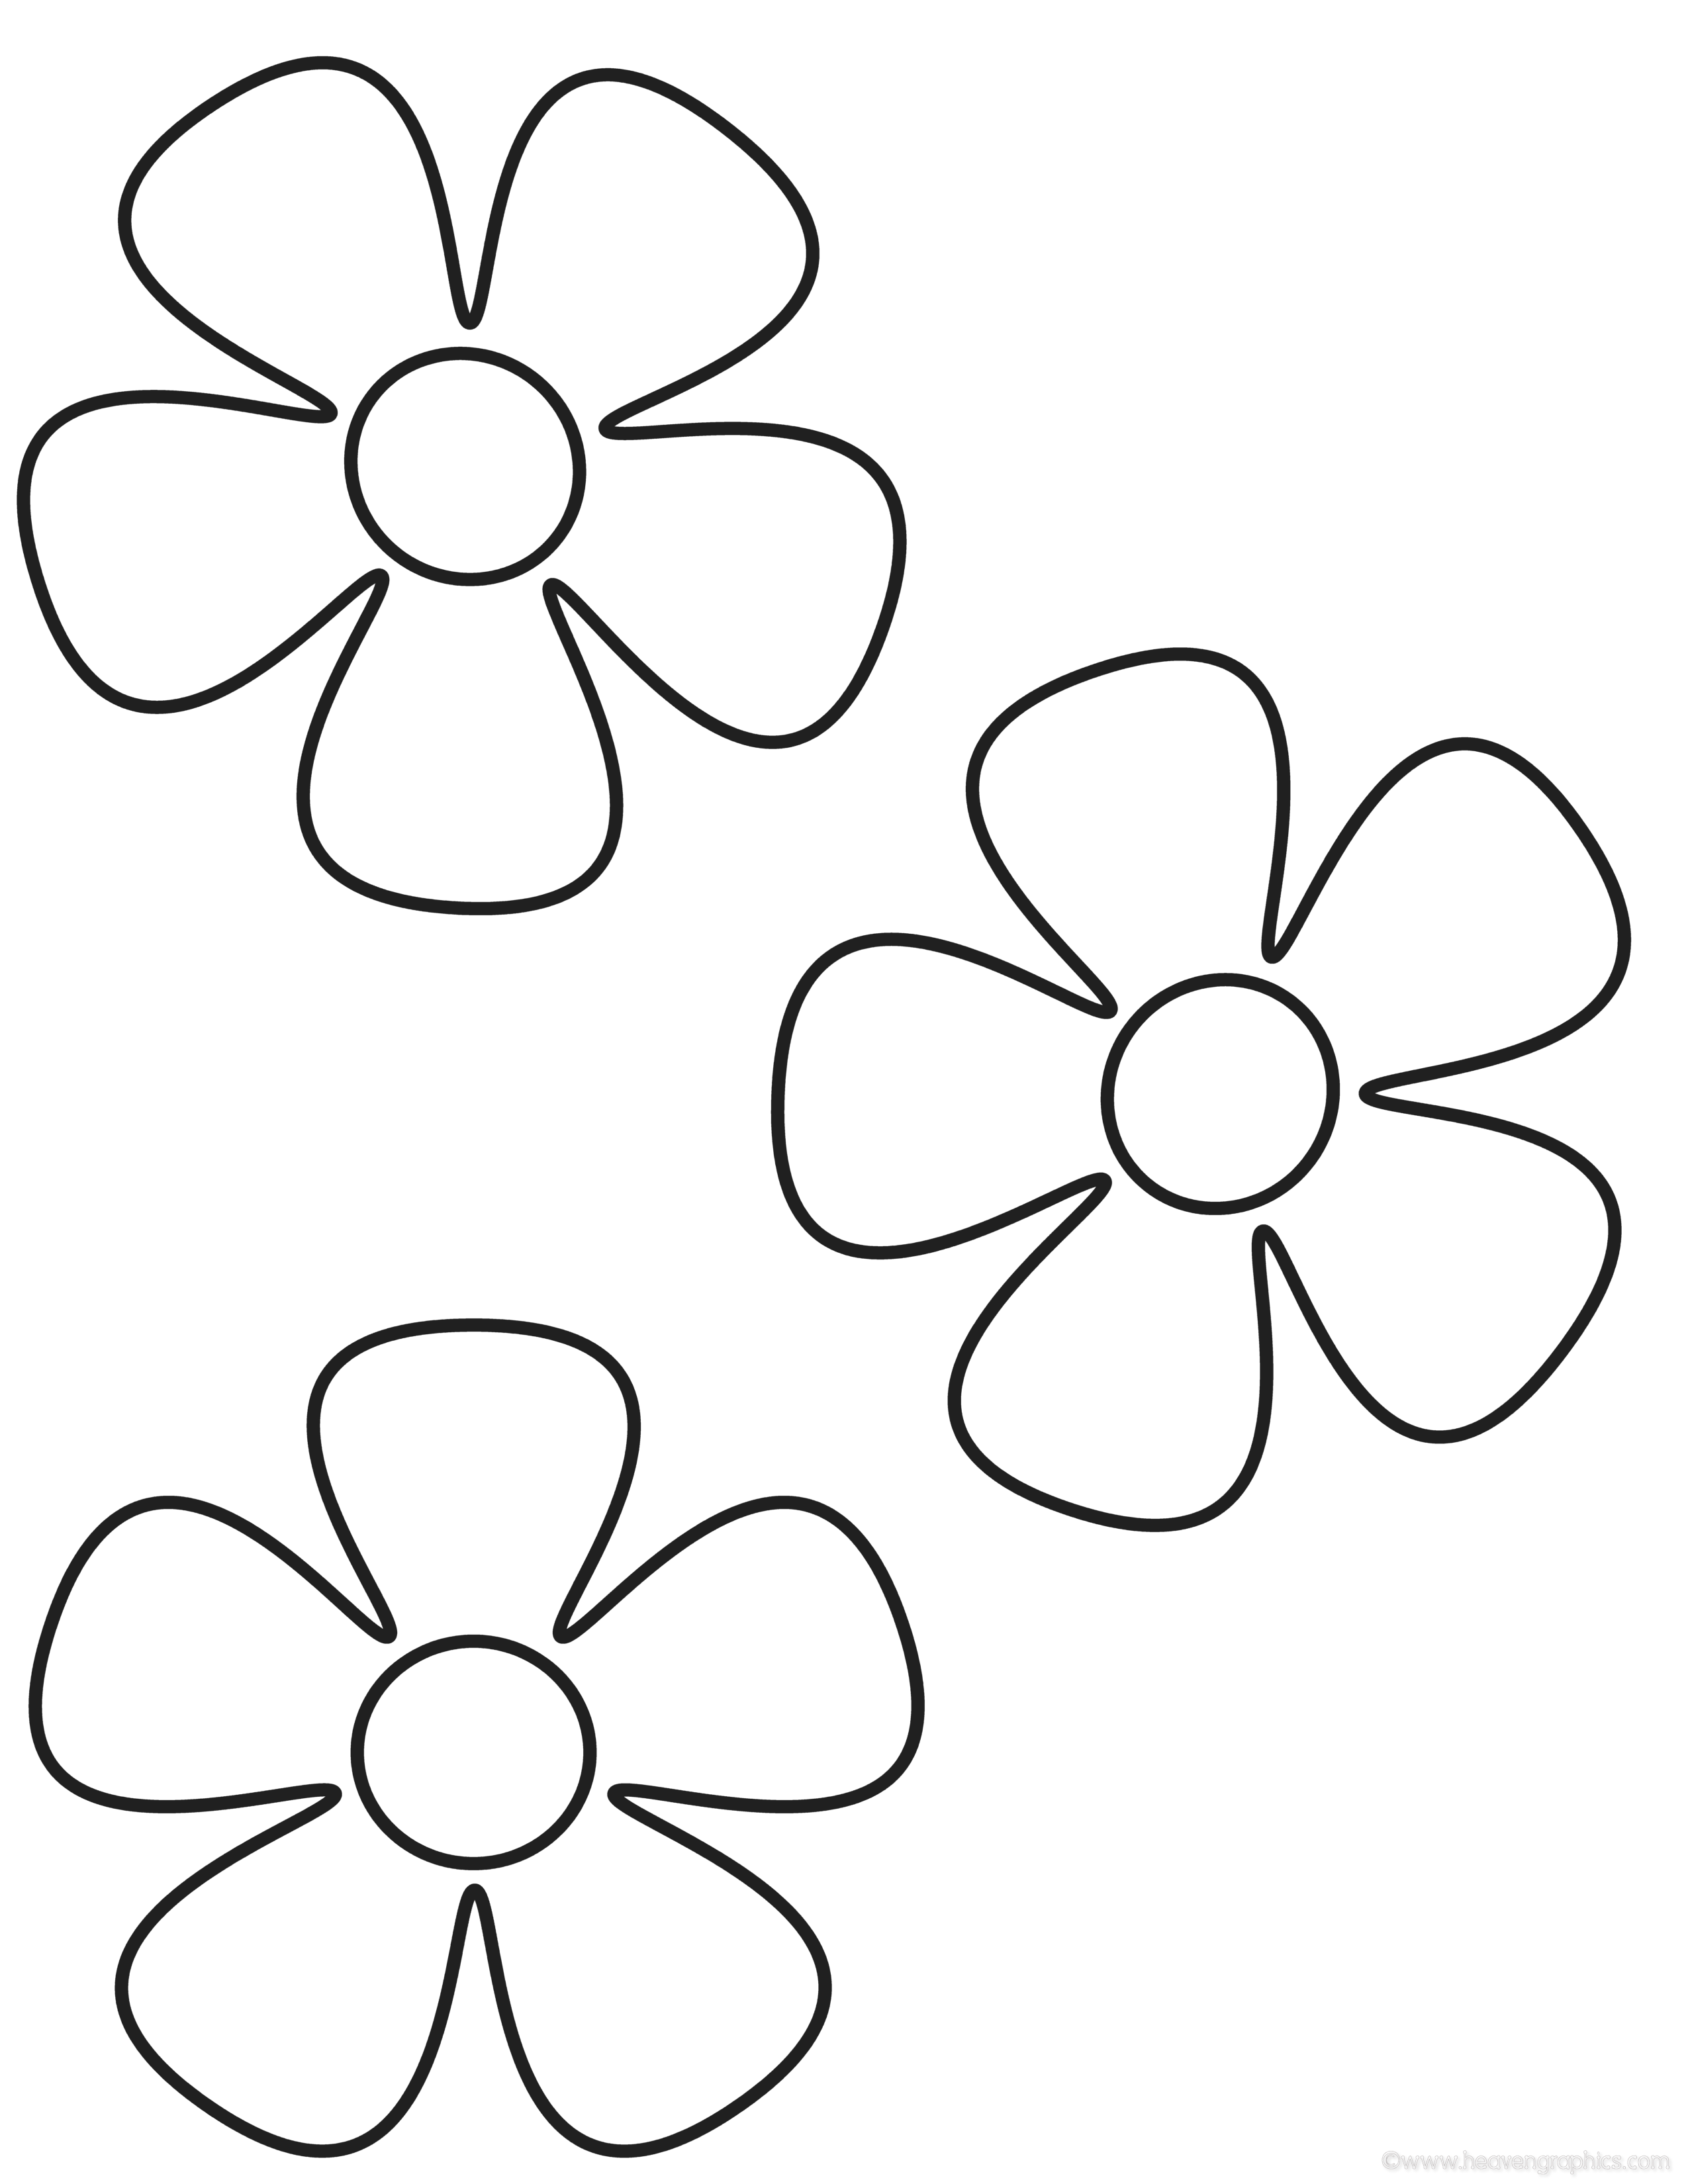 Simple Flower Colouring Pages | Printable Coloring Pages - ClipArt Best